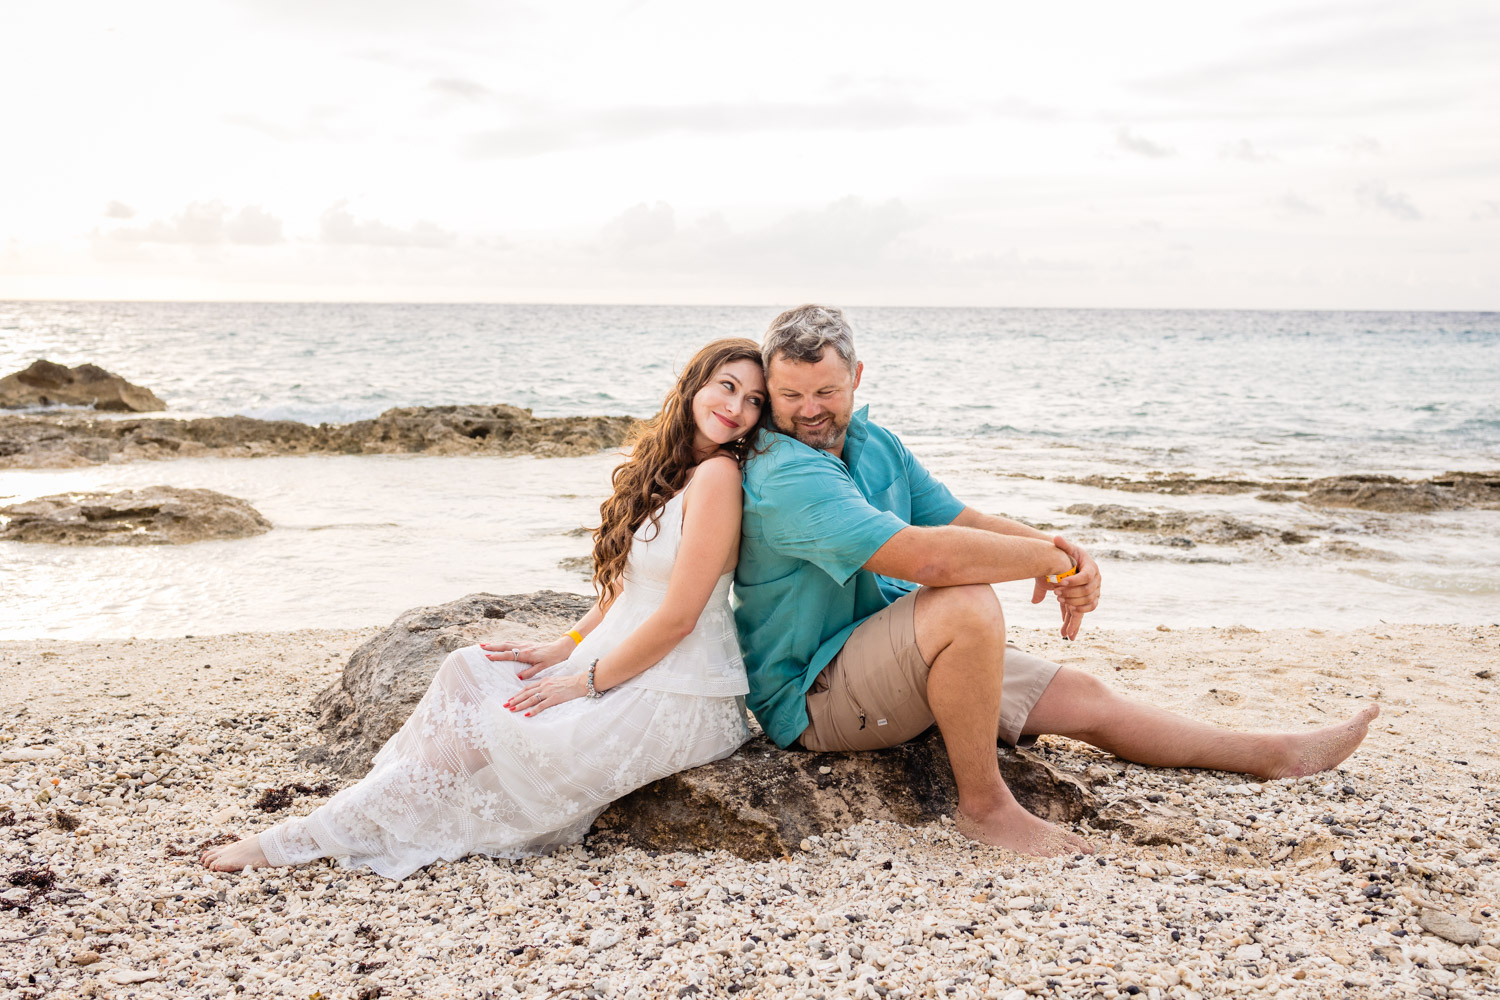 Are you looking a photographer in Cozumel? hire Elvis Aceff is the best!